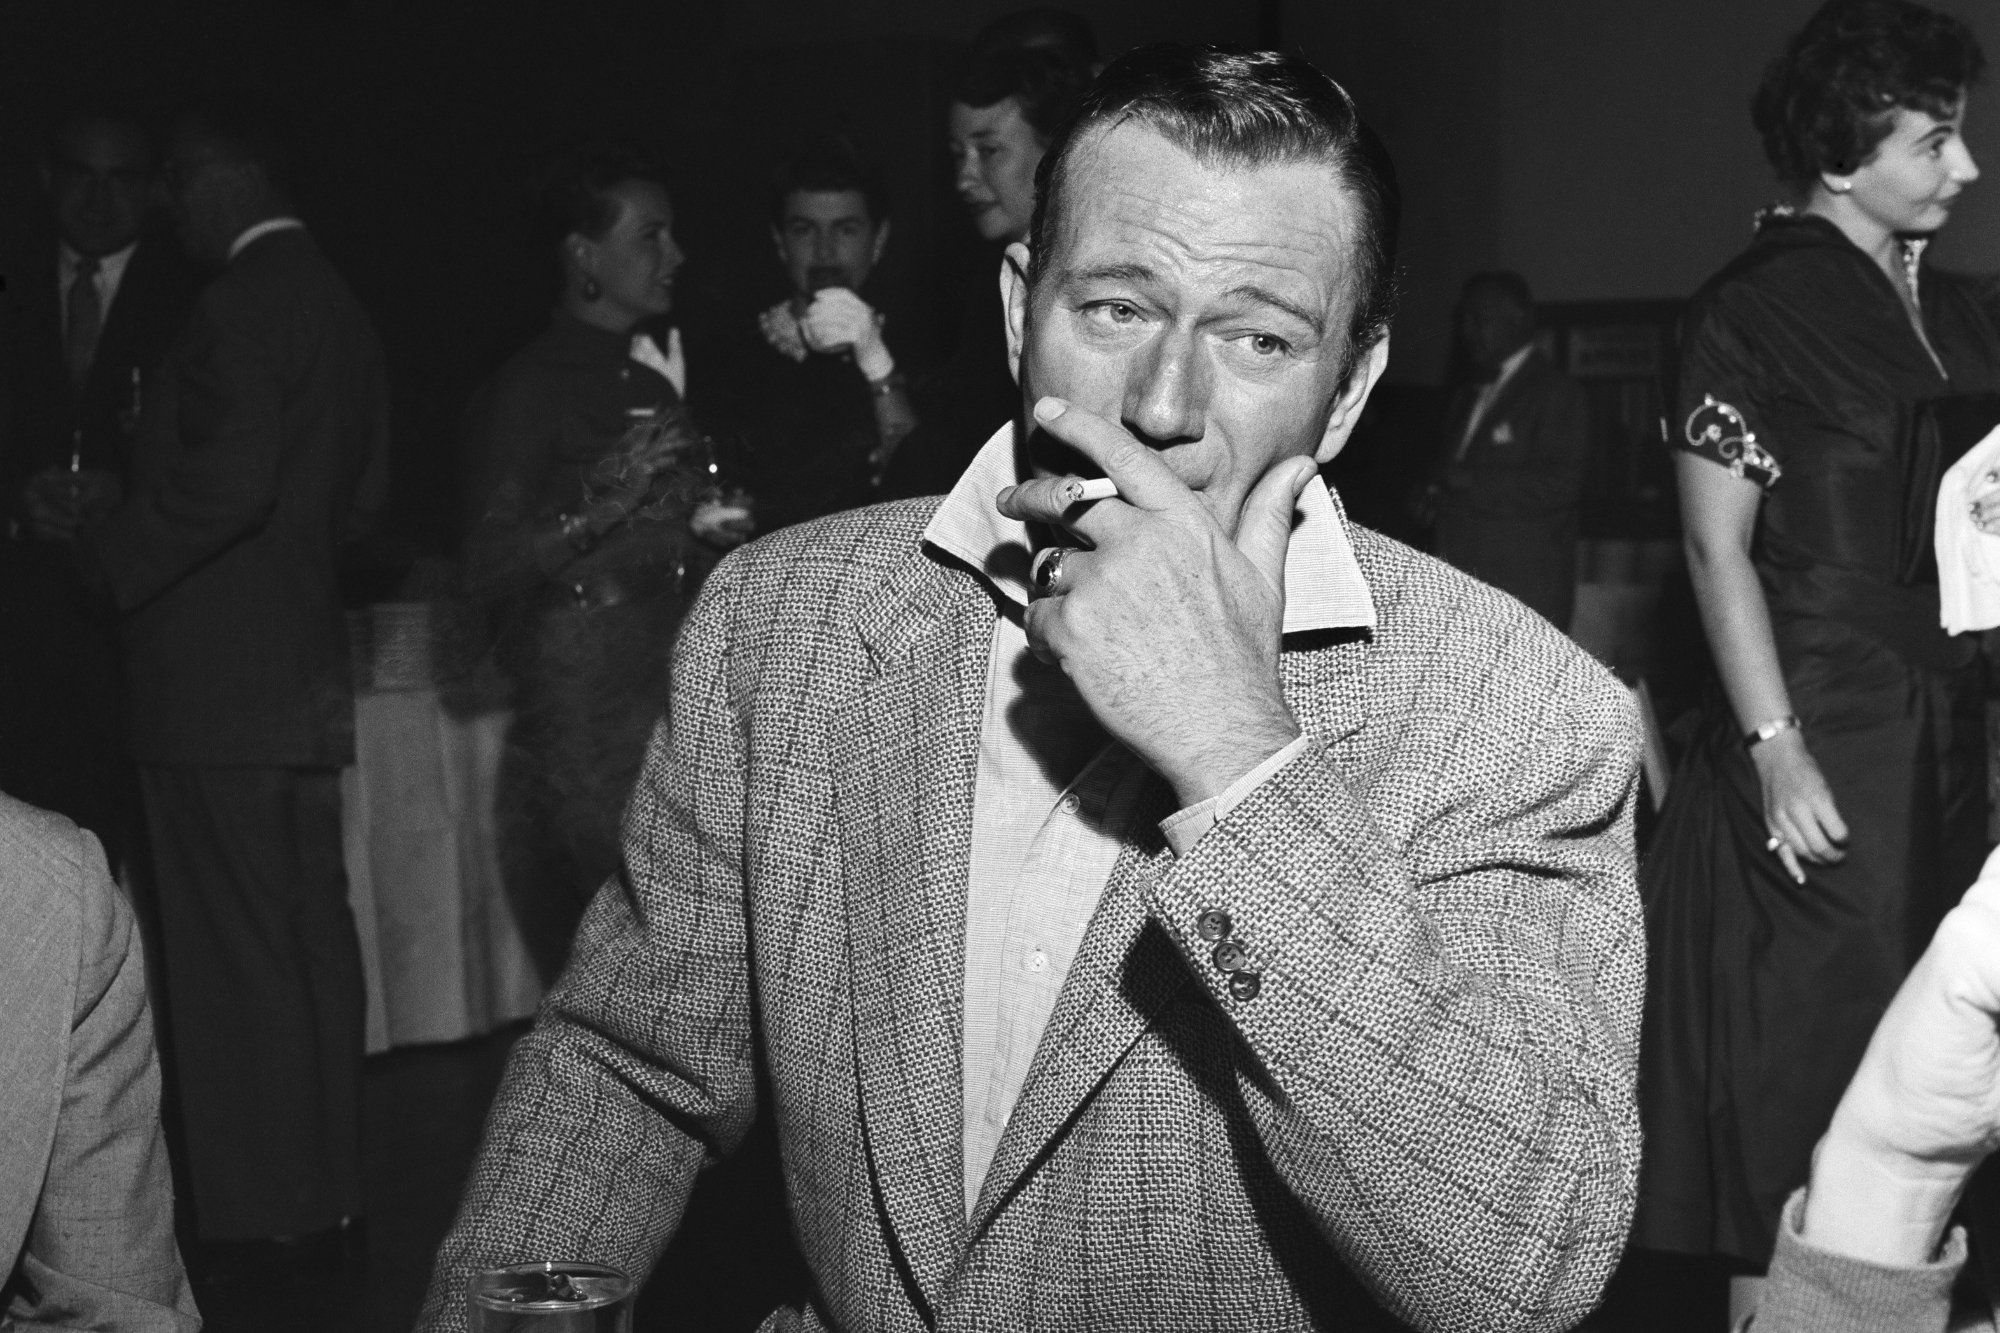 John Wayne, who co-created a club. He's wearing a suit and smoking a cigarette with a bunch of people at the party in the background.